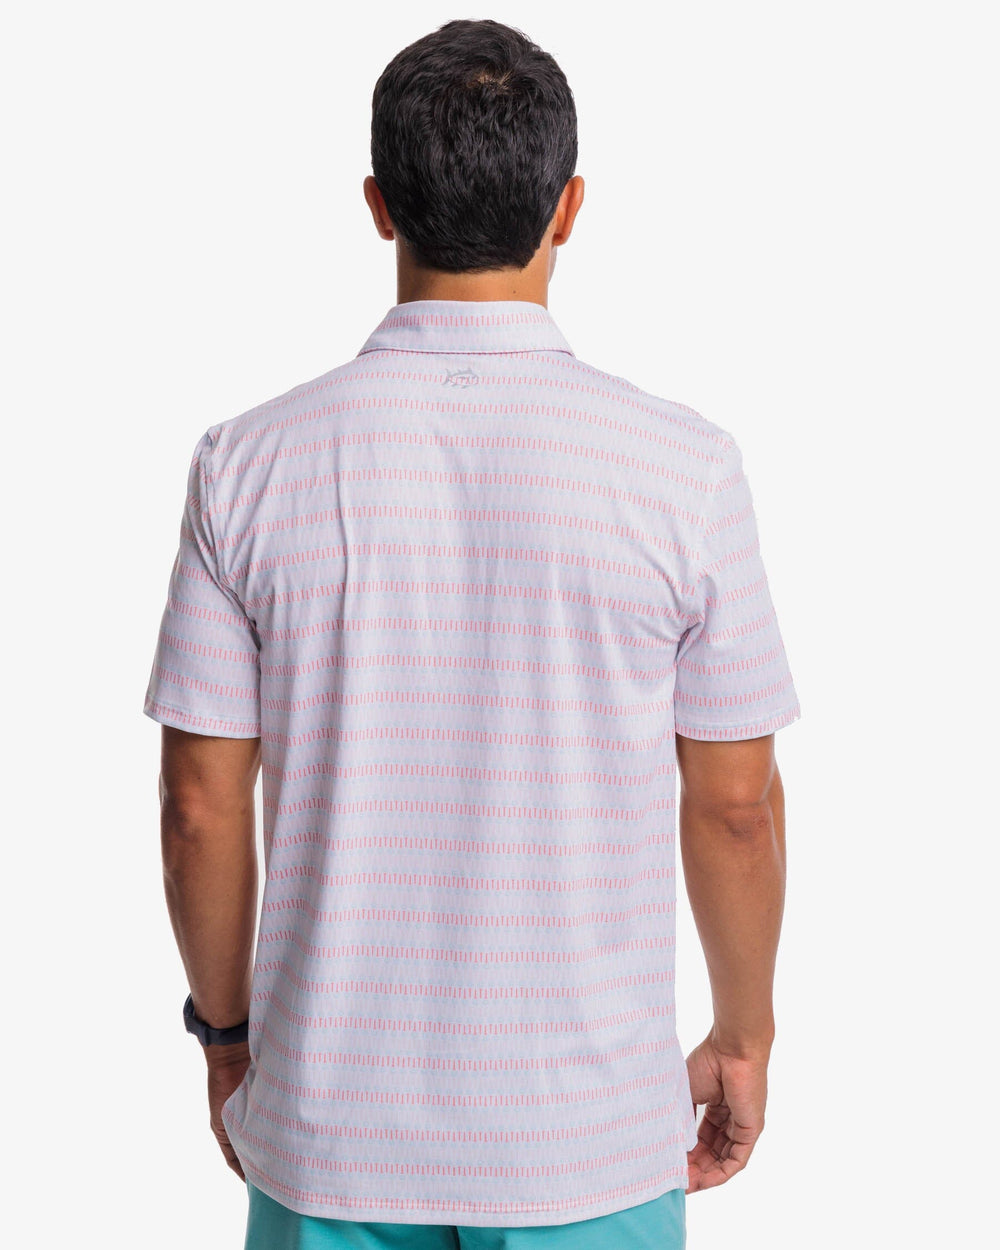 The back view of the Southern Tide Driver Best Ball Print Performance Polo Shirt by Southern Tide - Classic White